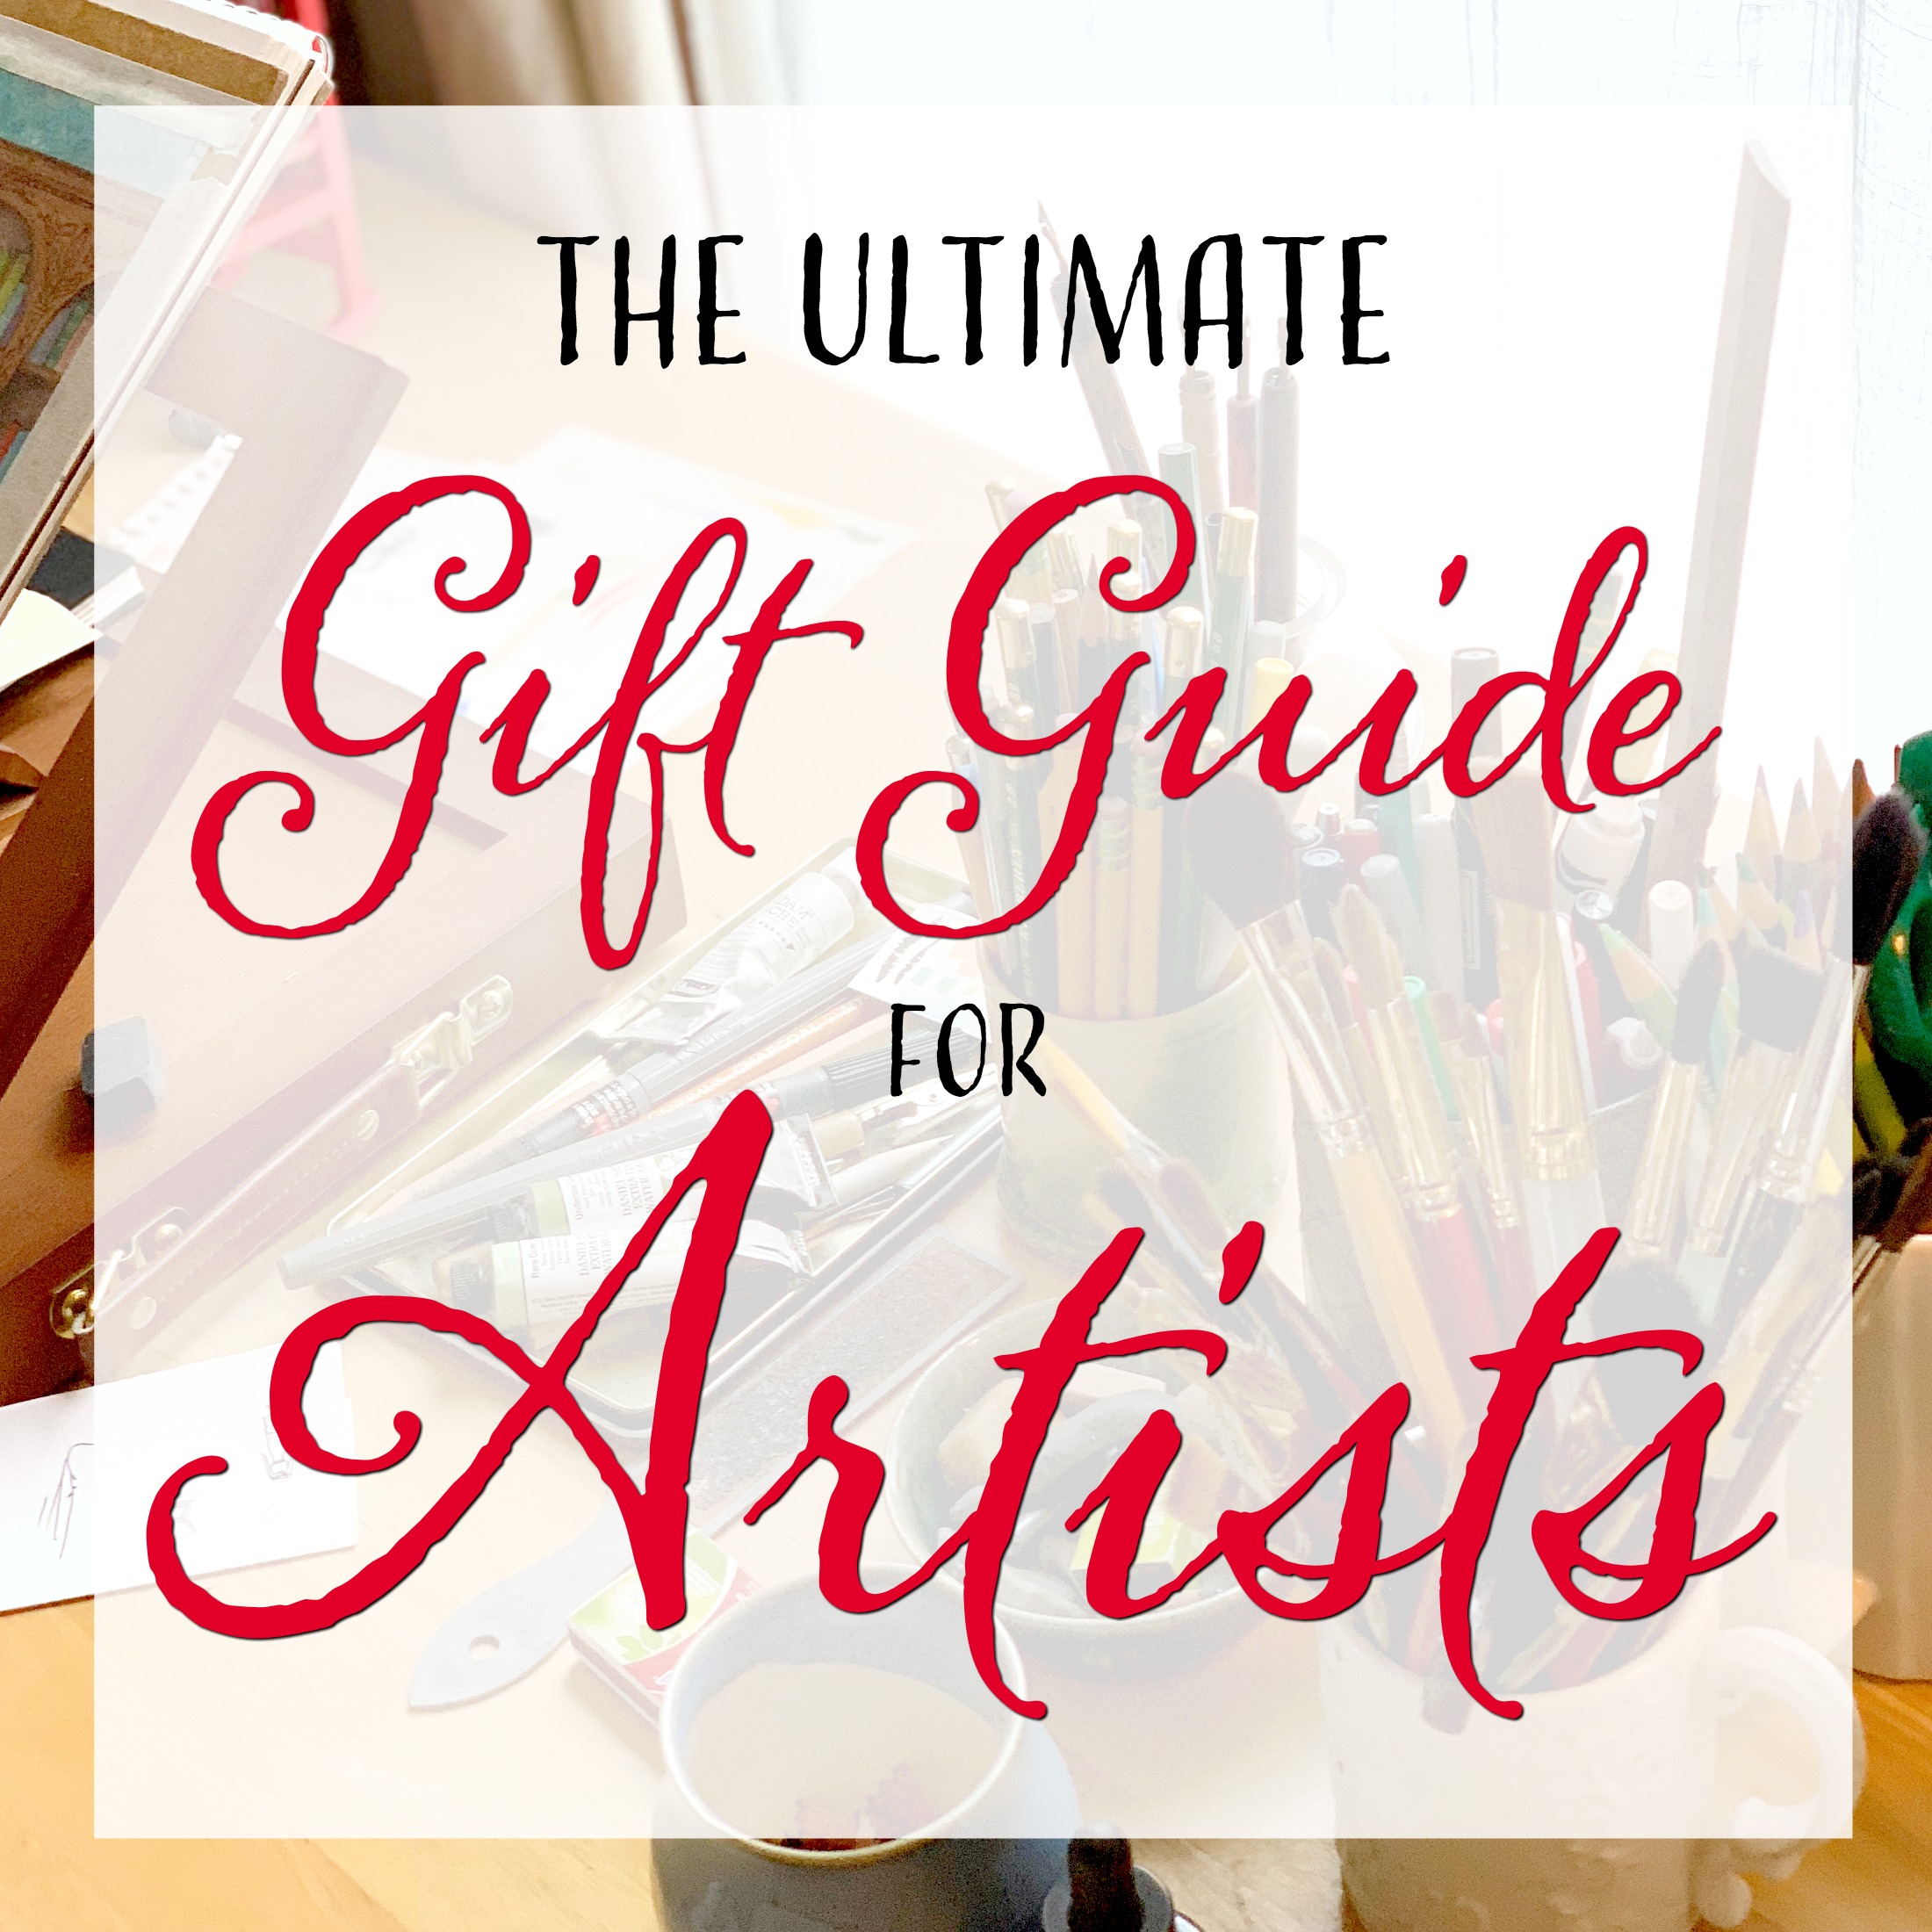 The gift guide list will help you find fun and practical gifts for your artists.